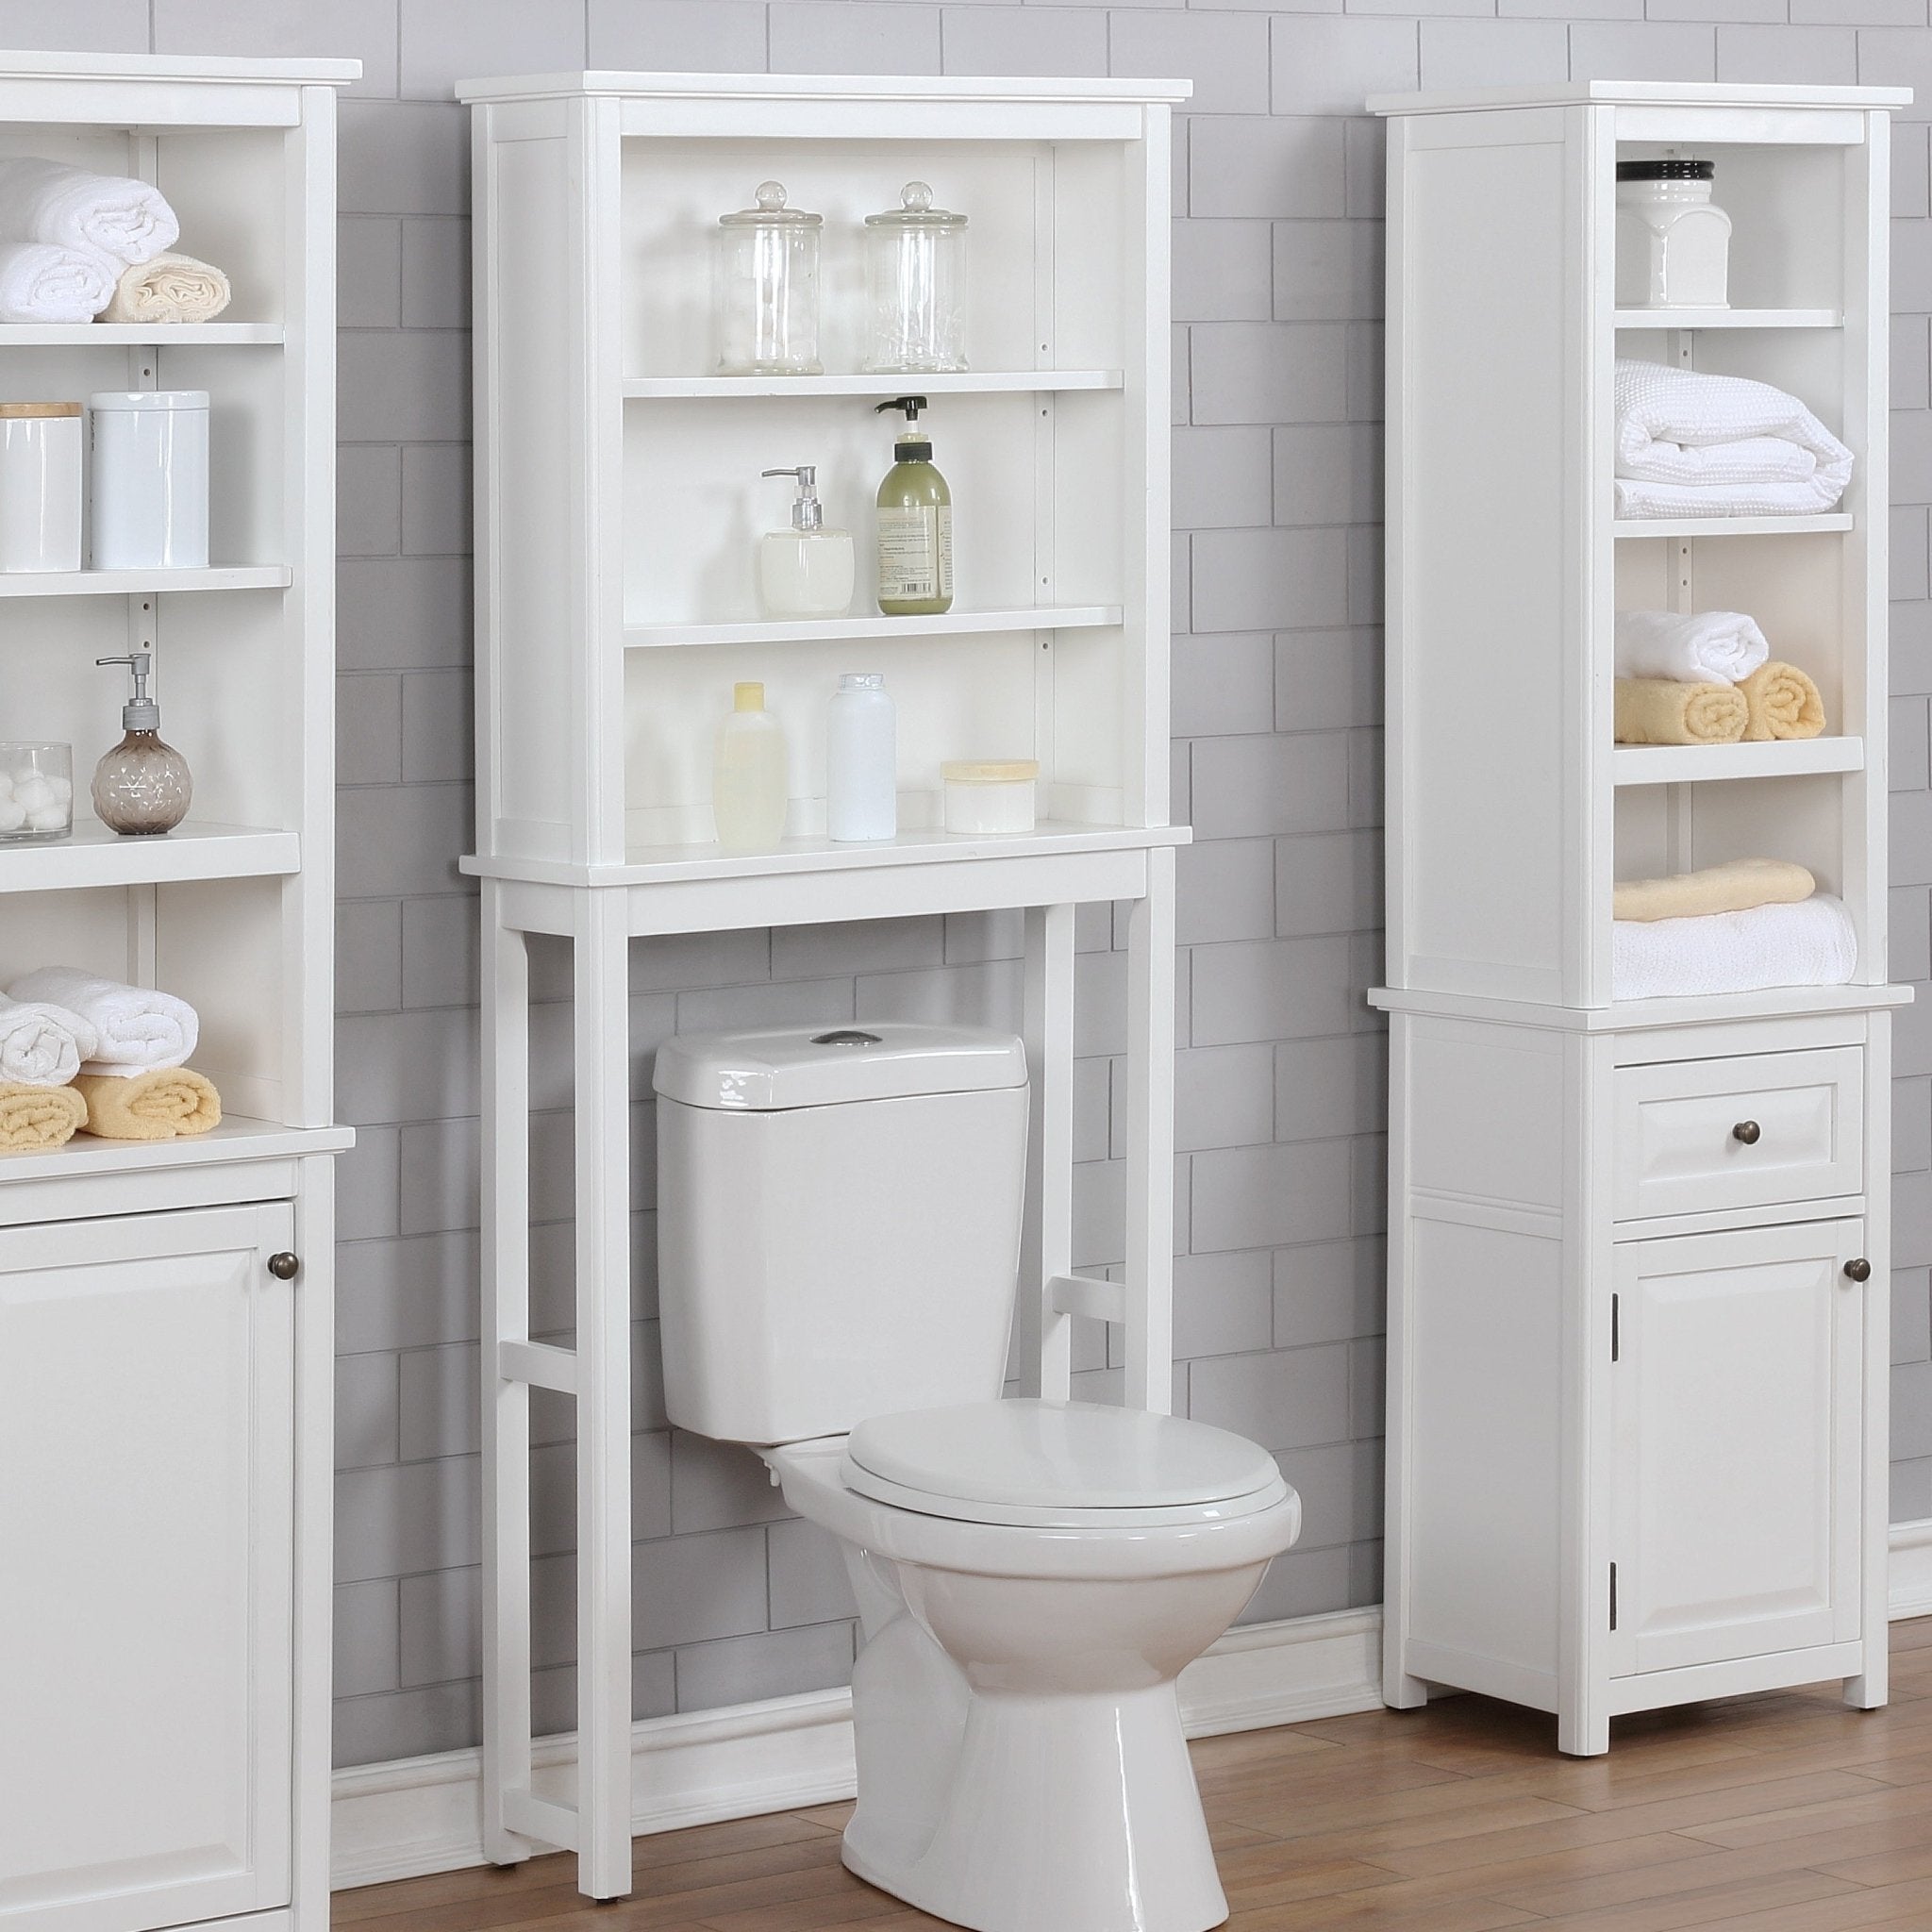 dorset bath over the toilet space saver storage with open upper shelvesstorage and organization 289657